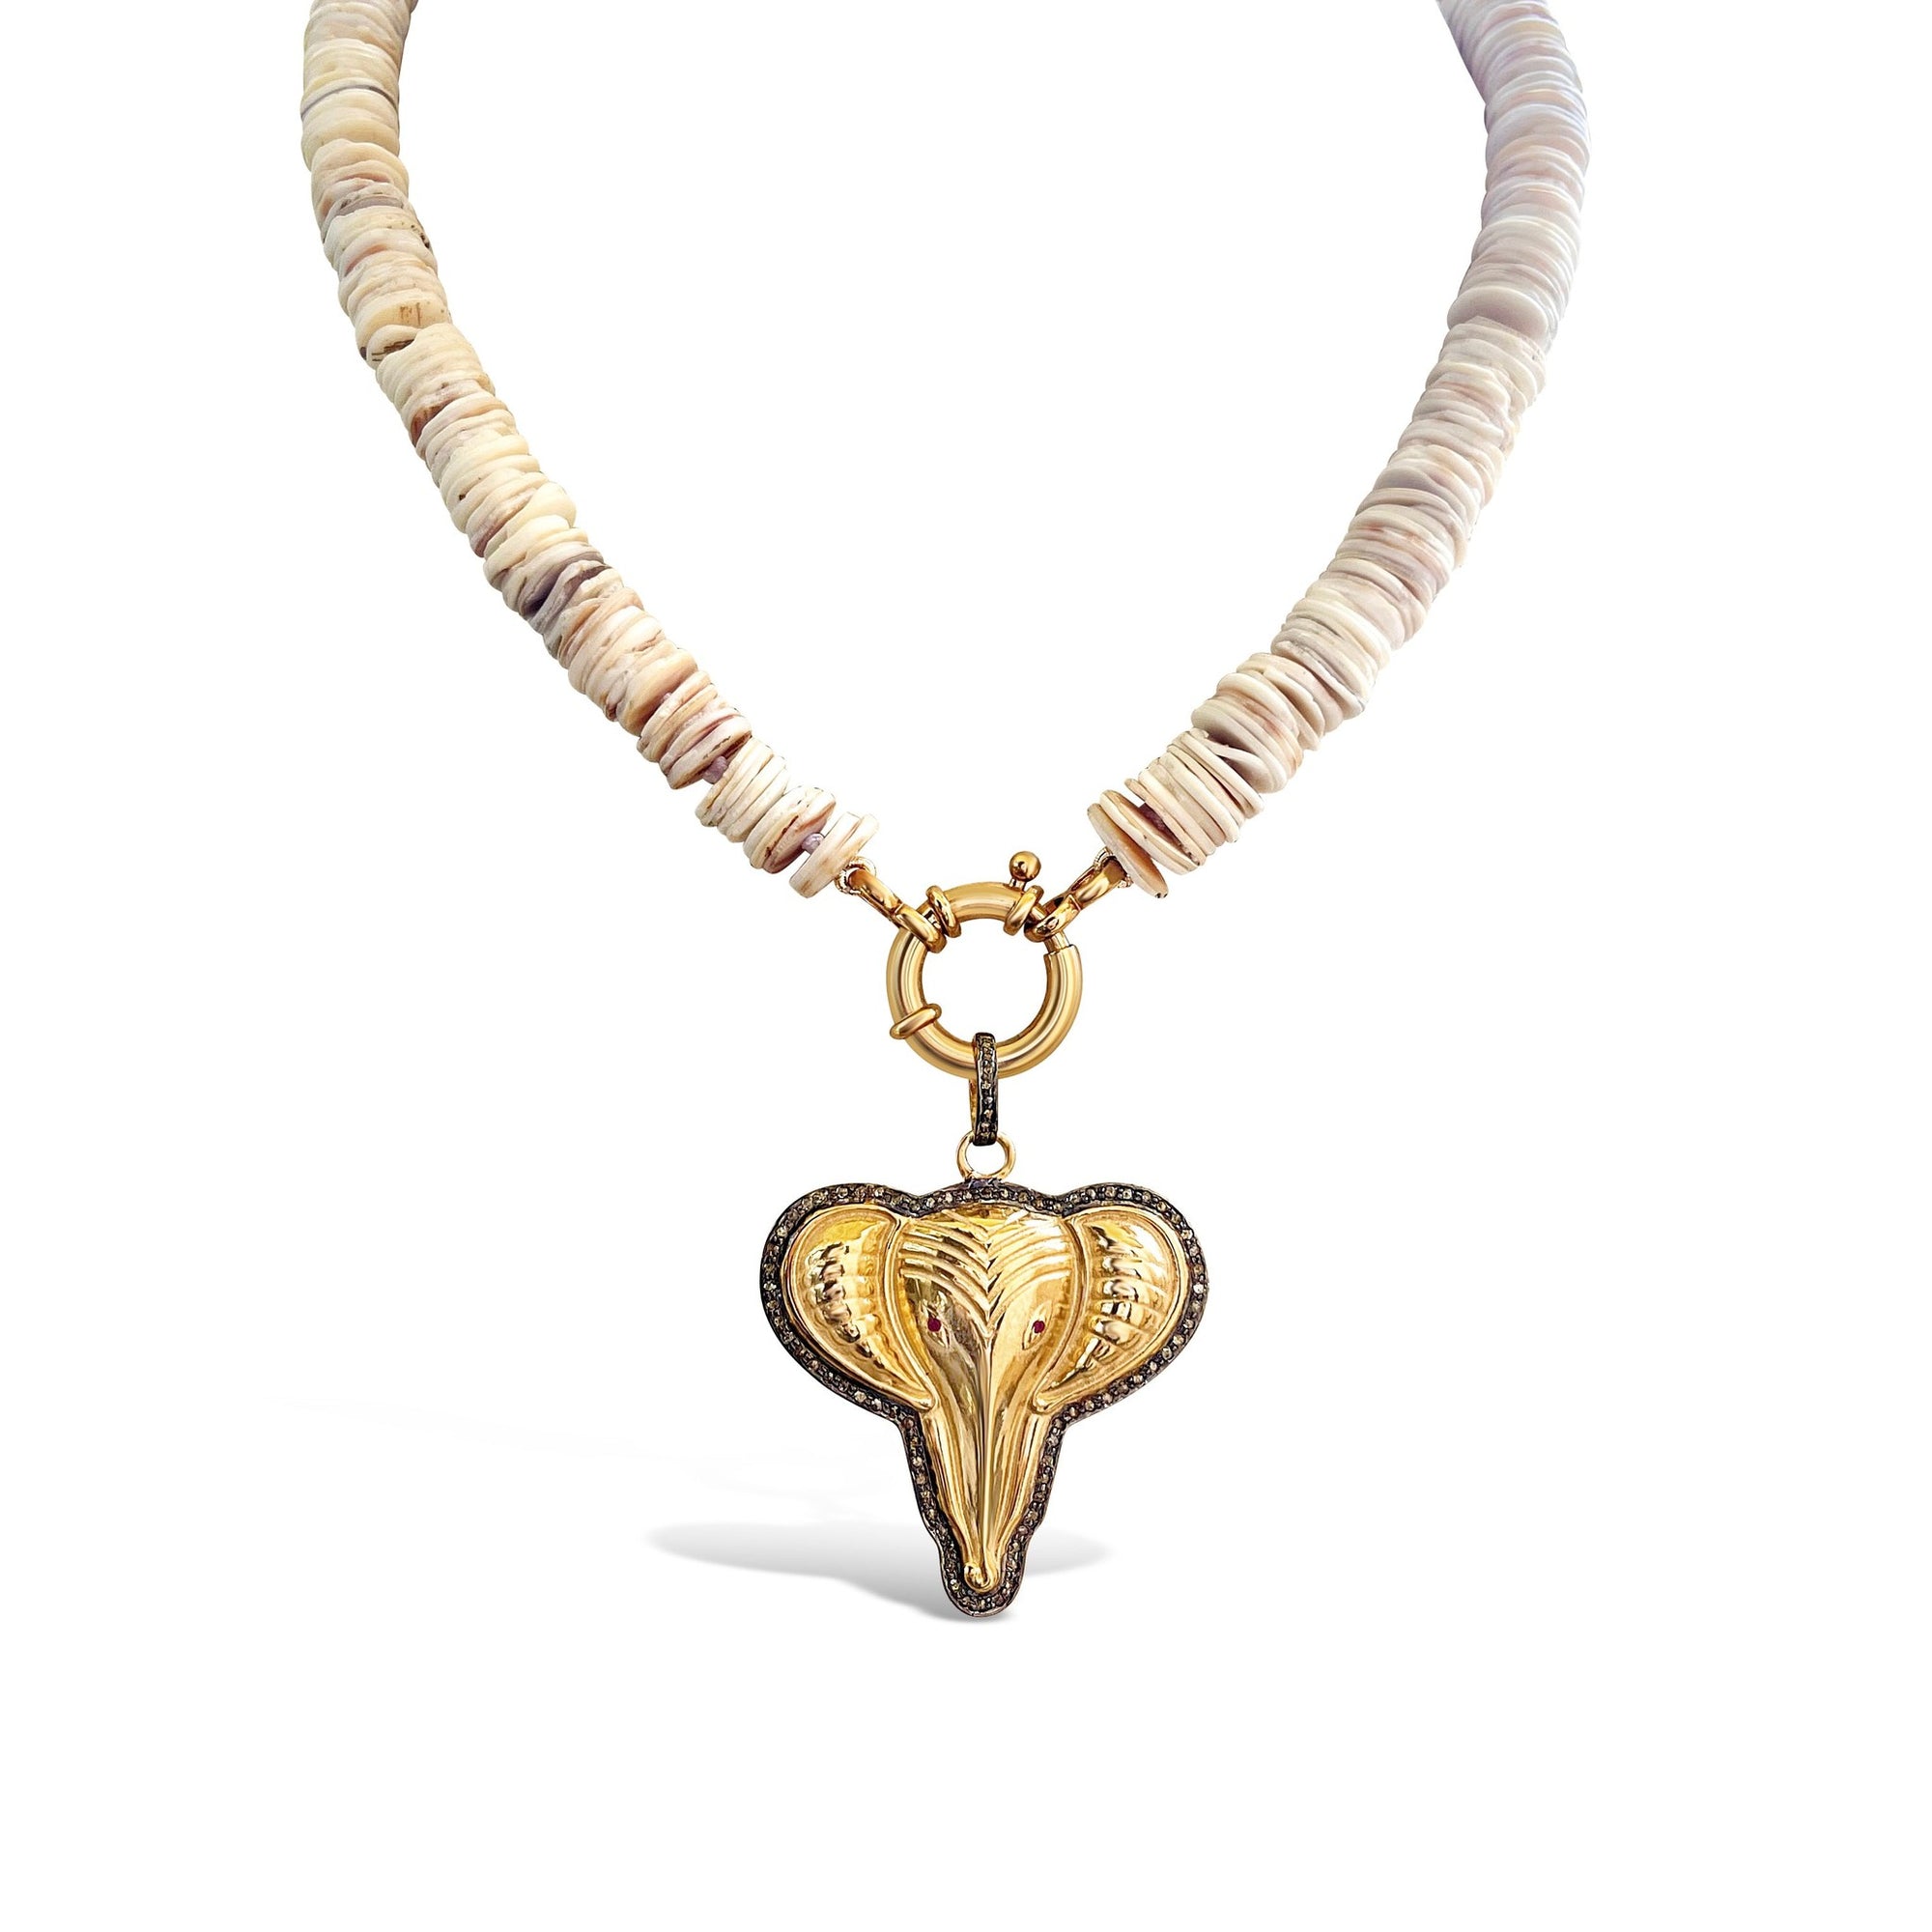 Ostrich Shell Crystal Necklace with Ganesha Amulet Pendant